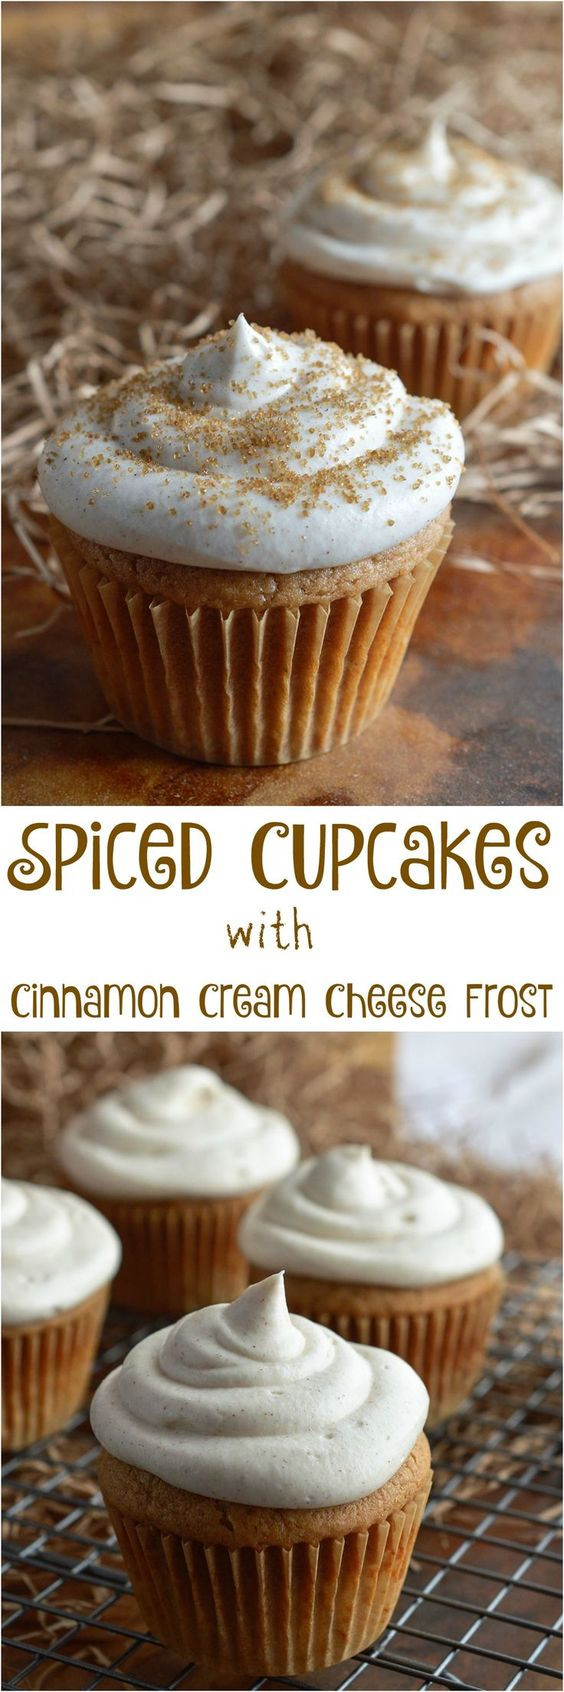 Fall Desserts Pinterest
 Fall desserts Cream cheese frosting and Cream on Pinterest